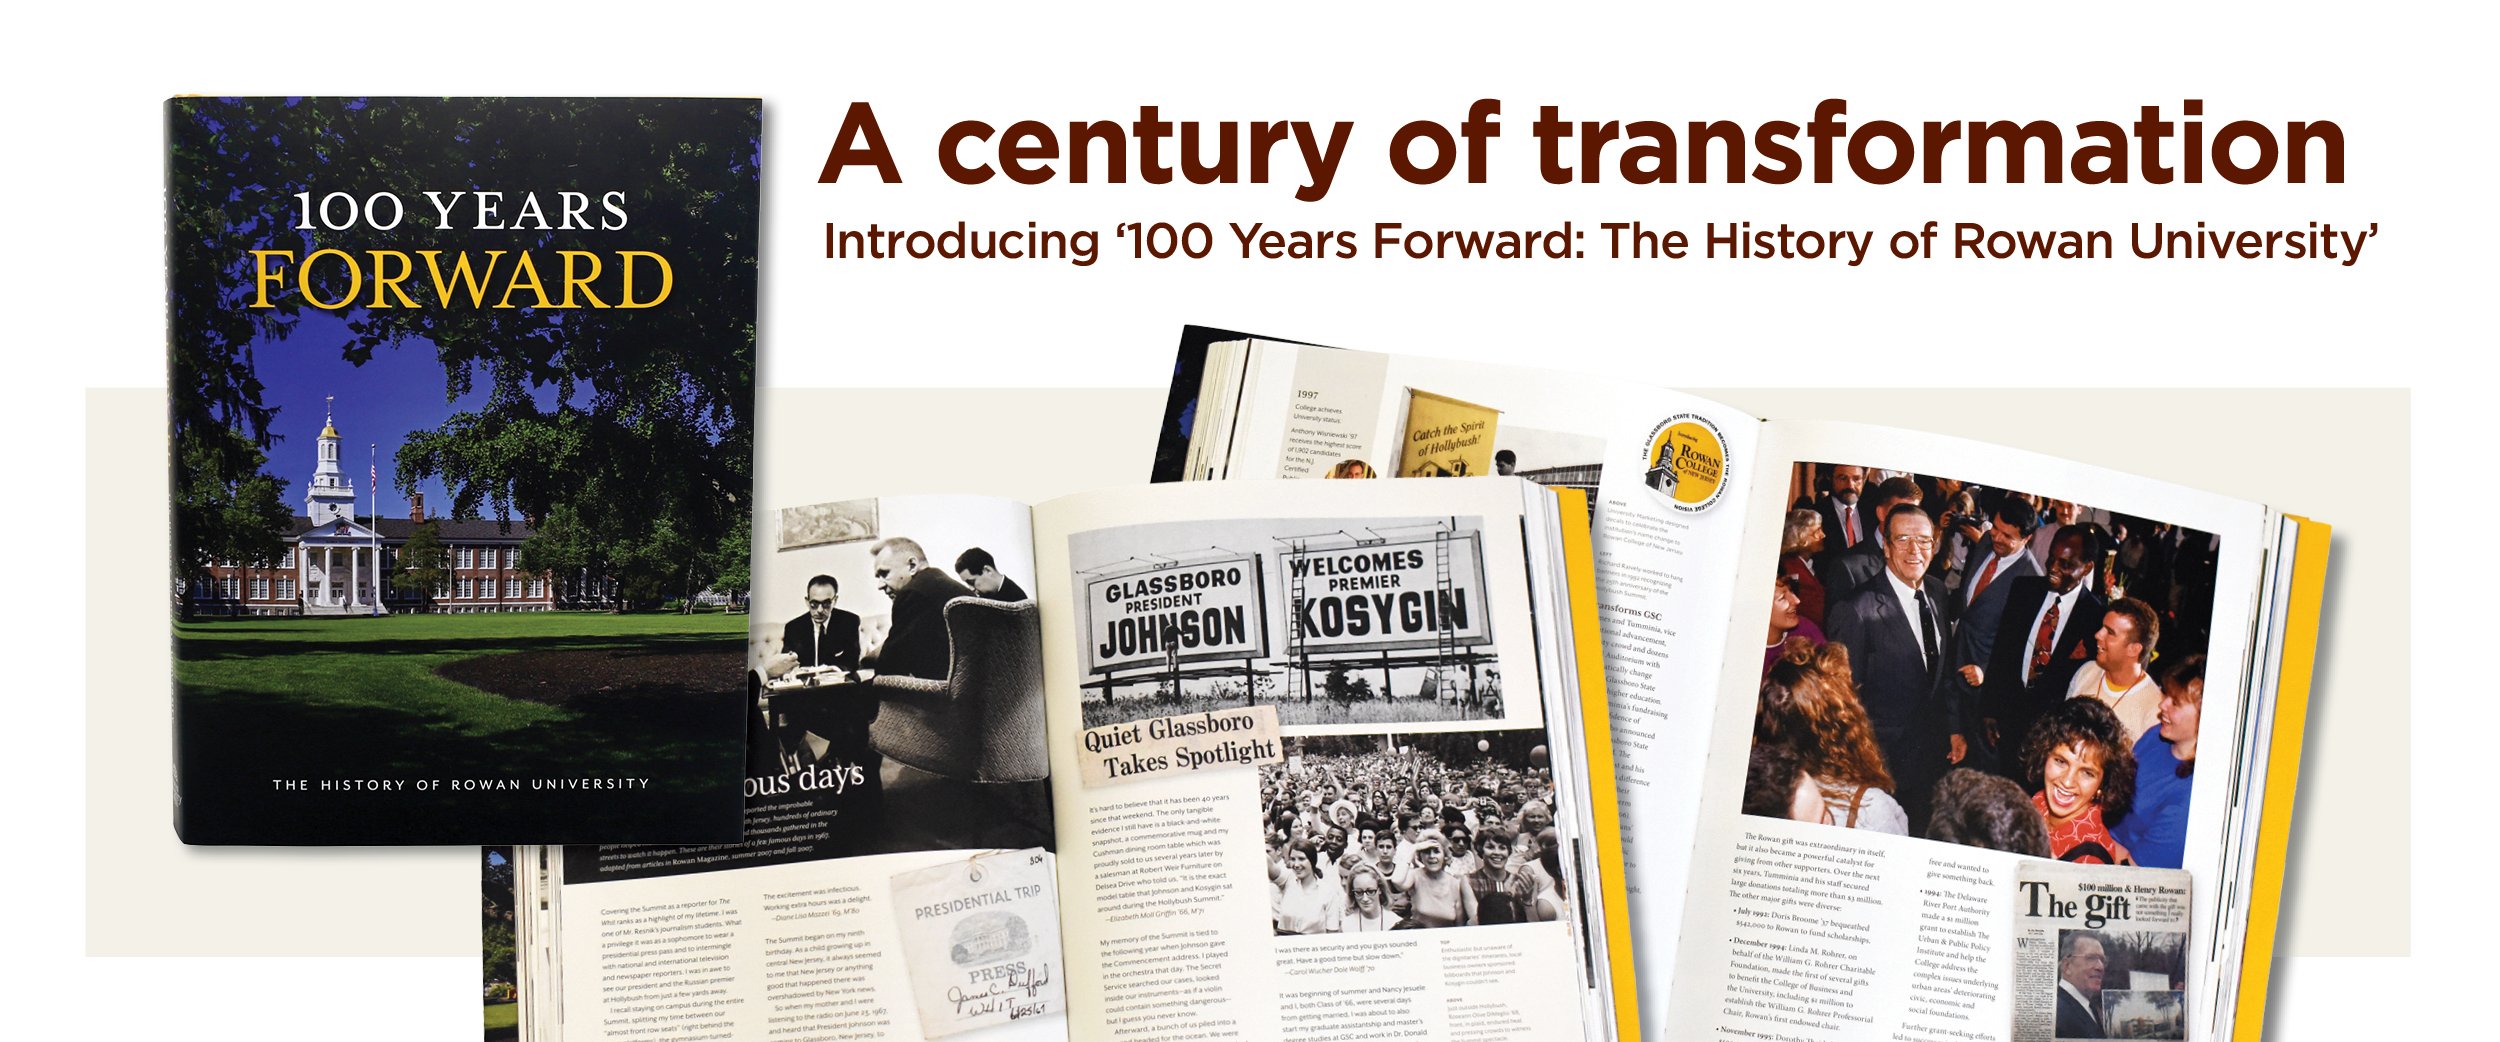 A century of transformation: Introducing '100 Years Forward: The History of Rowan University'